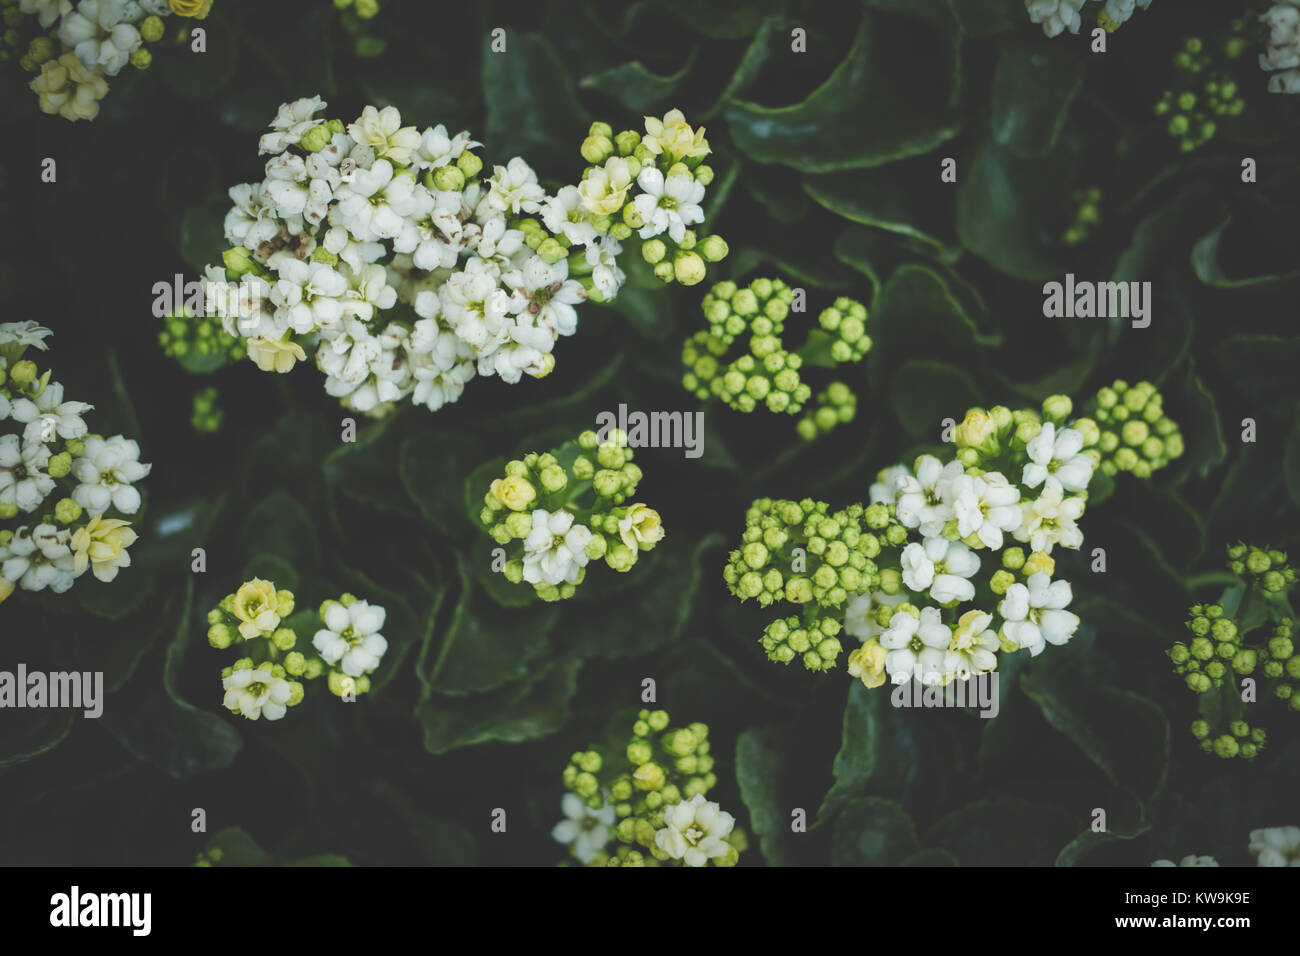 kanlanchoe in garden. blooming flora in park. white blossom Stock Photo